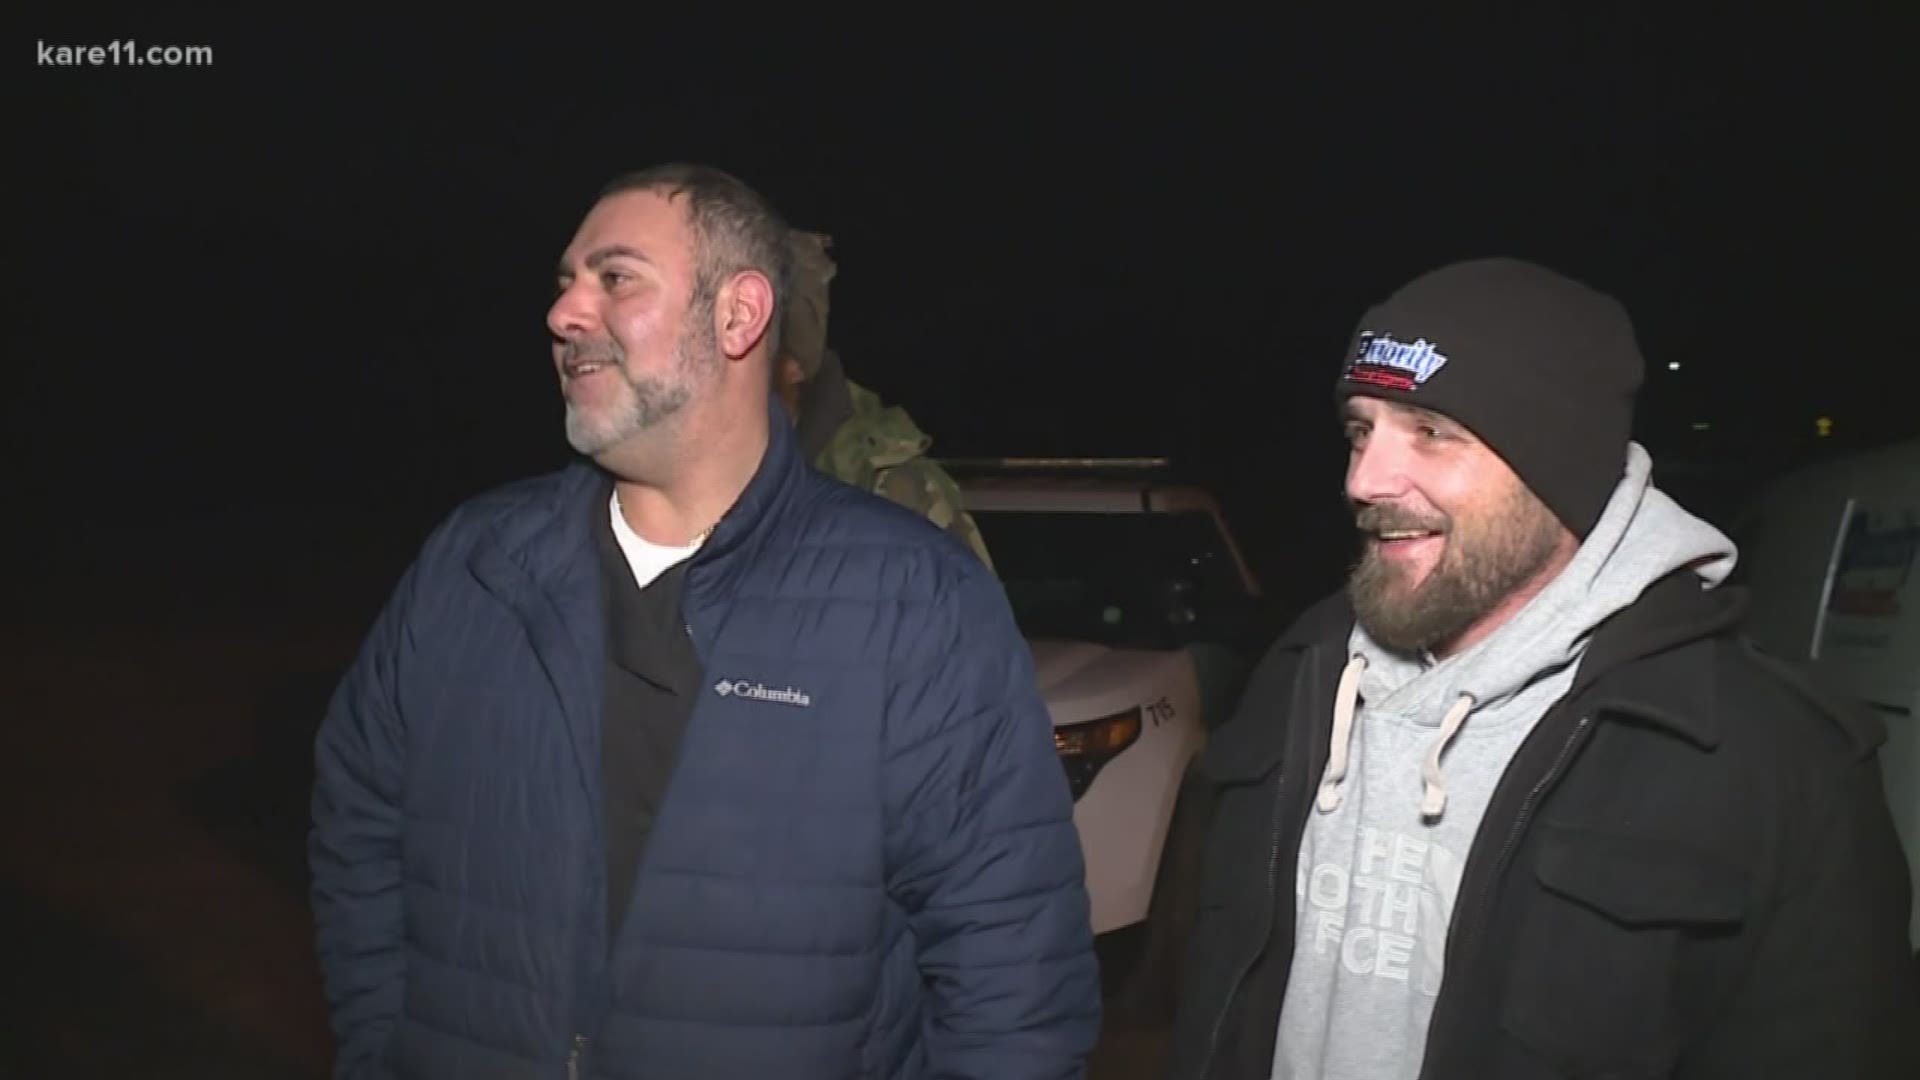 John Khoury tells KARE 11 he showed up Monday morning around 9 a.m. to open The Beruit Restaurant and immediately noticed his silver 2001 Dodge Ram 1500 with a plow hung on the front was conspicuously missing.